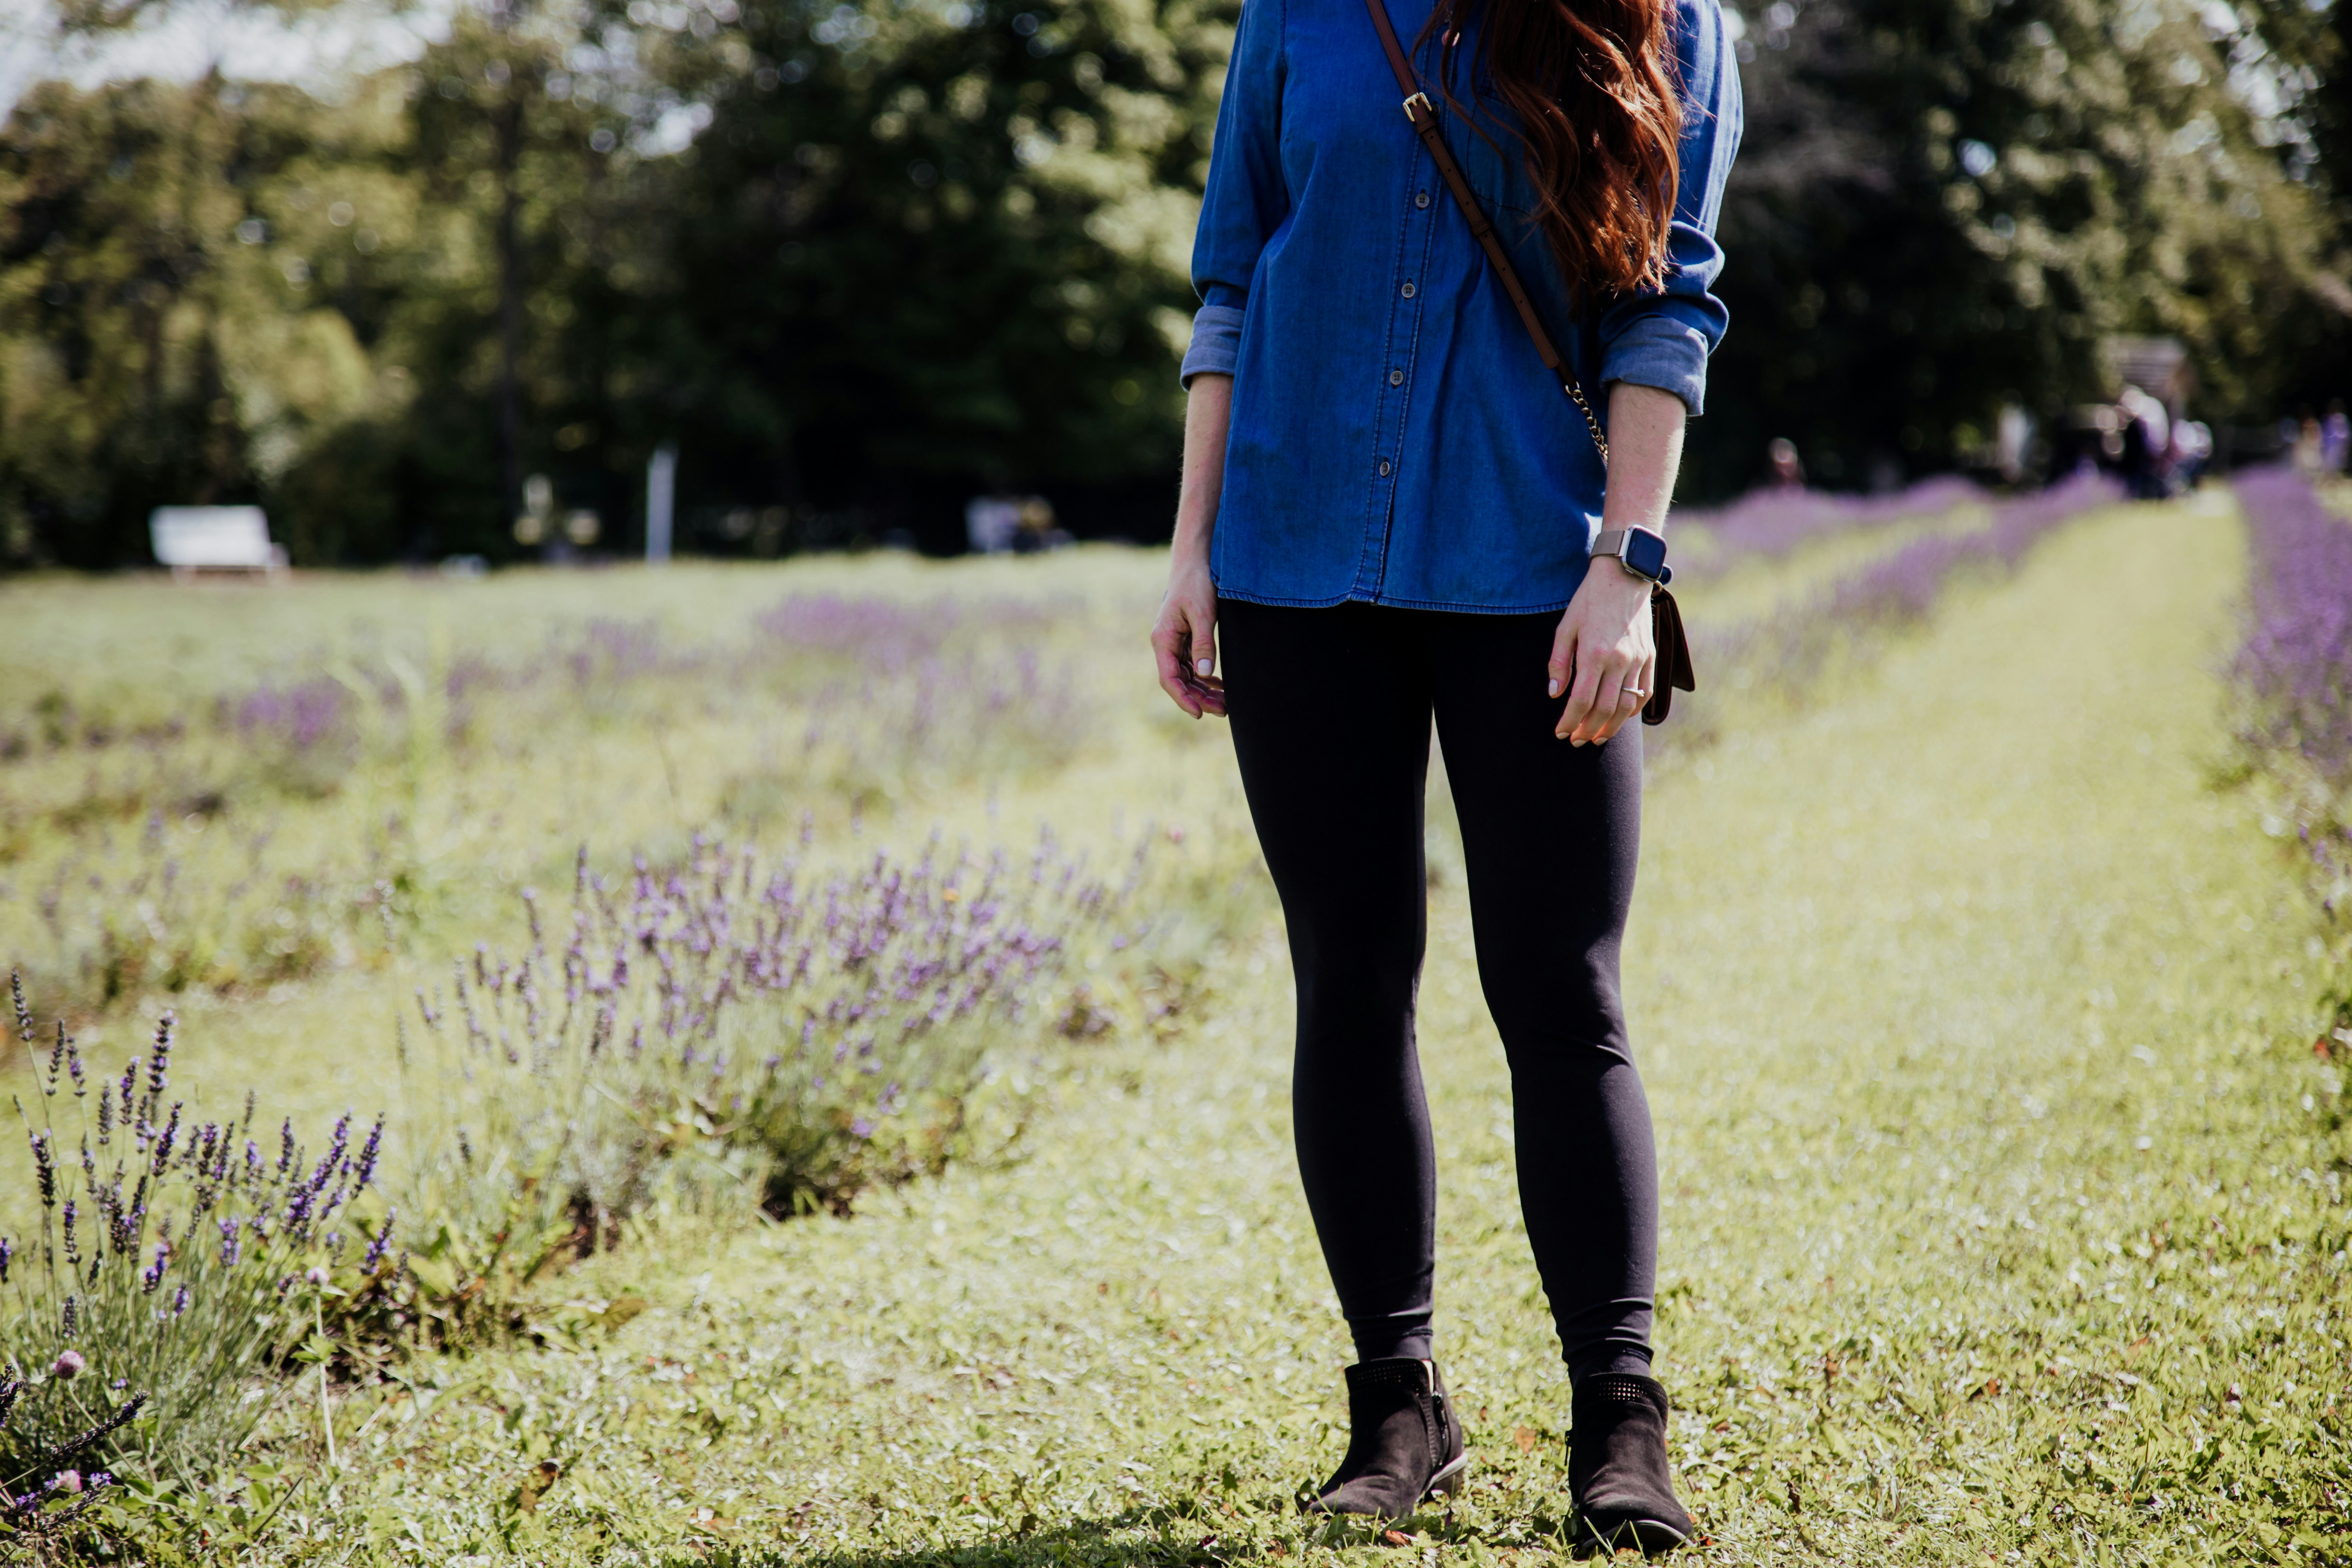 woman wearing blue blouse and black leggings standing on grass